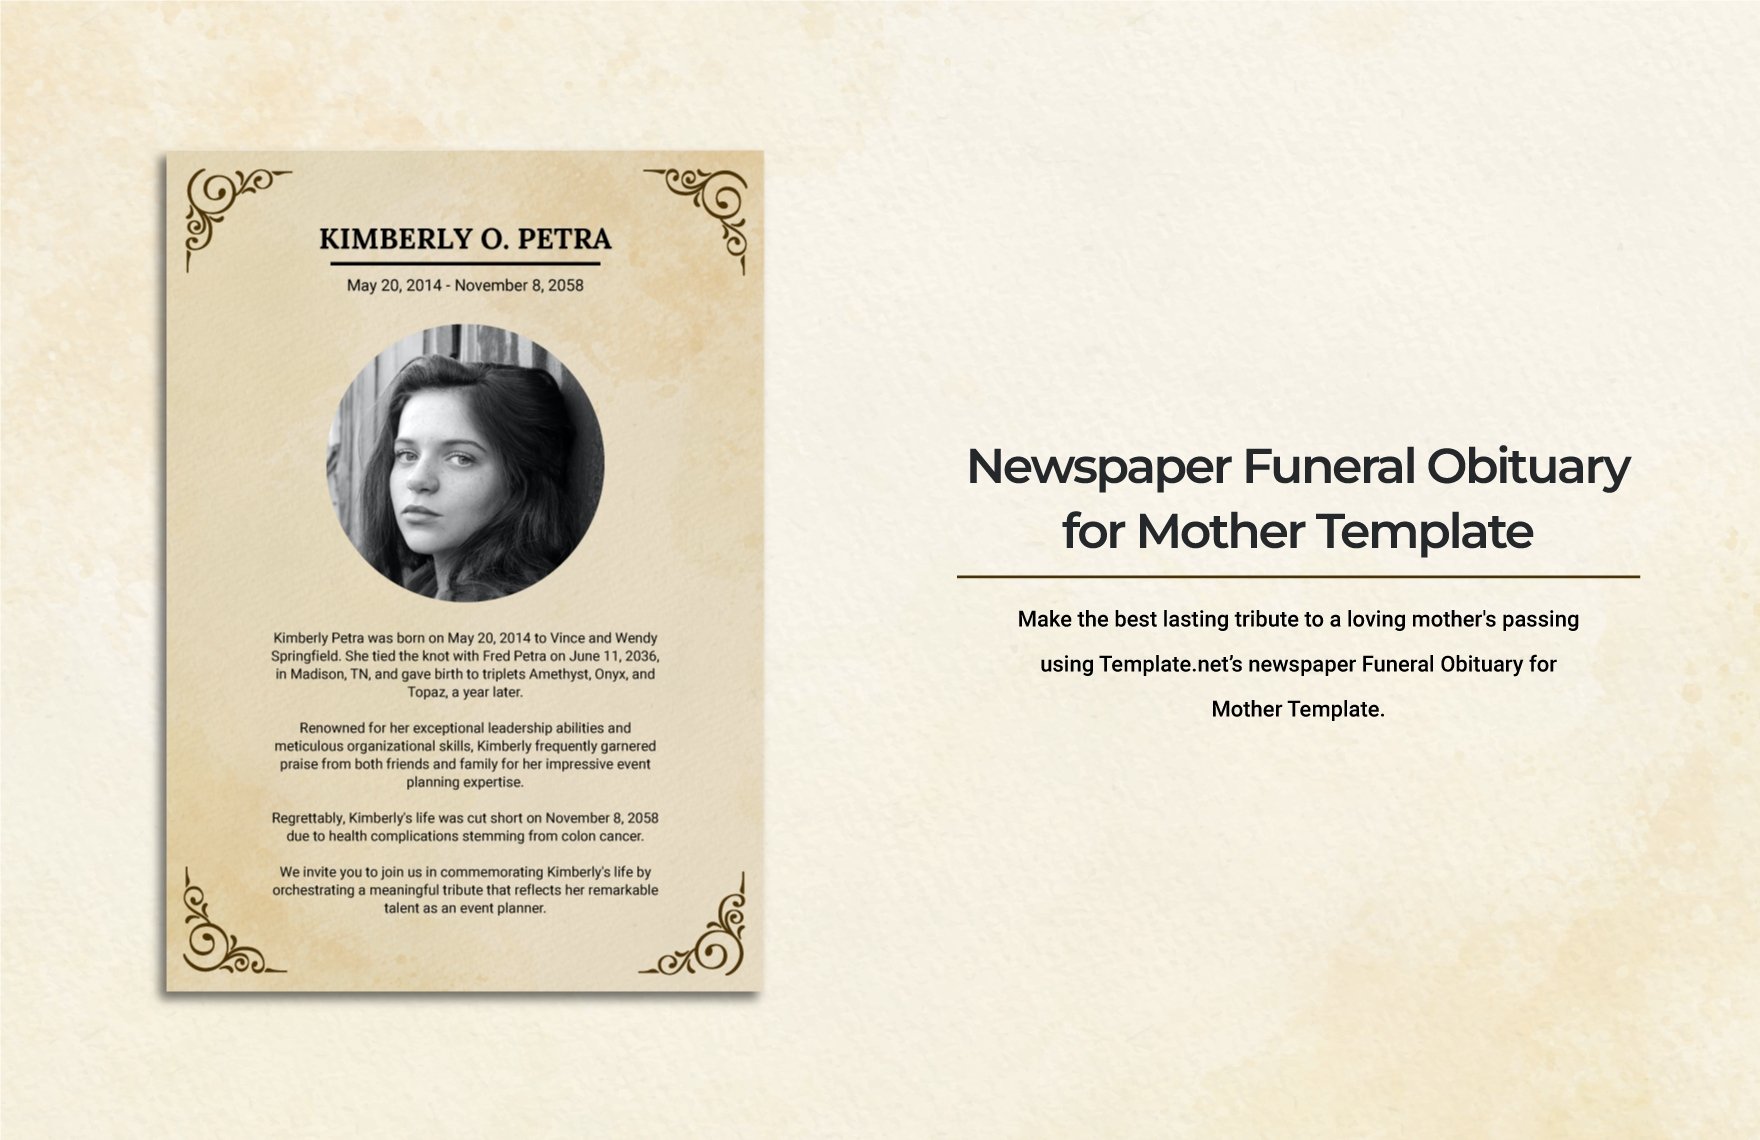 newspaper funeral obituary for mother template